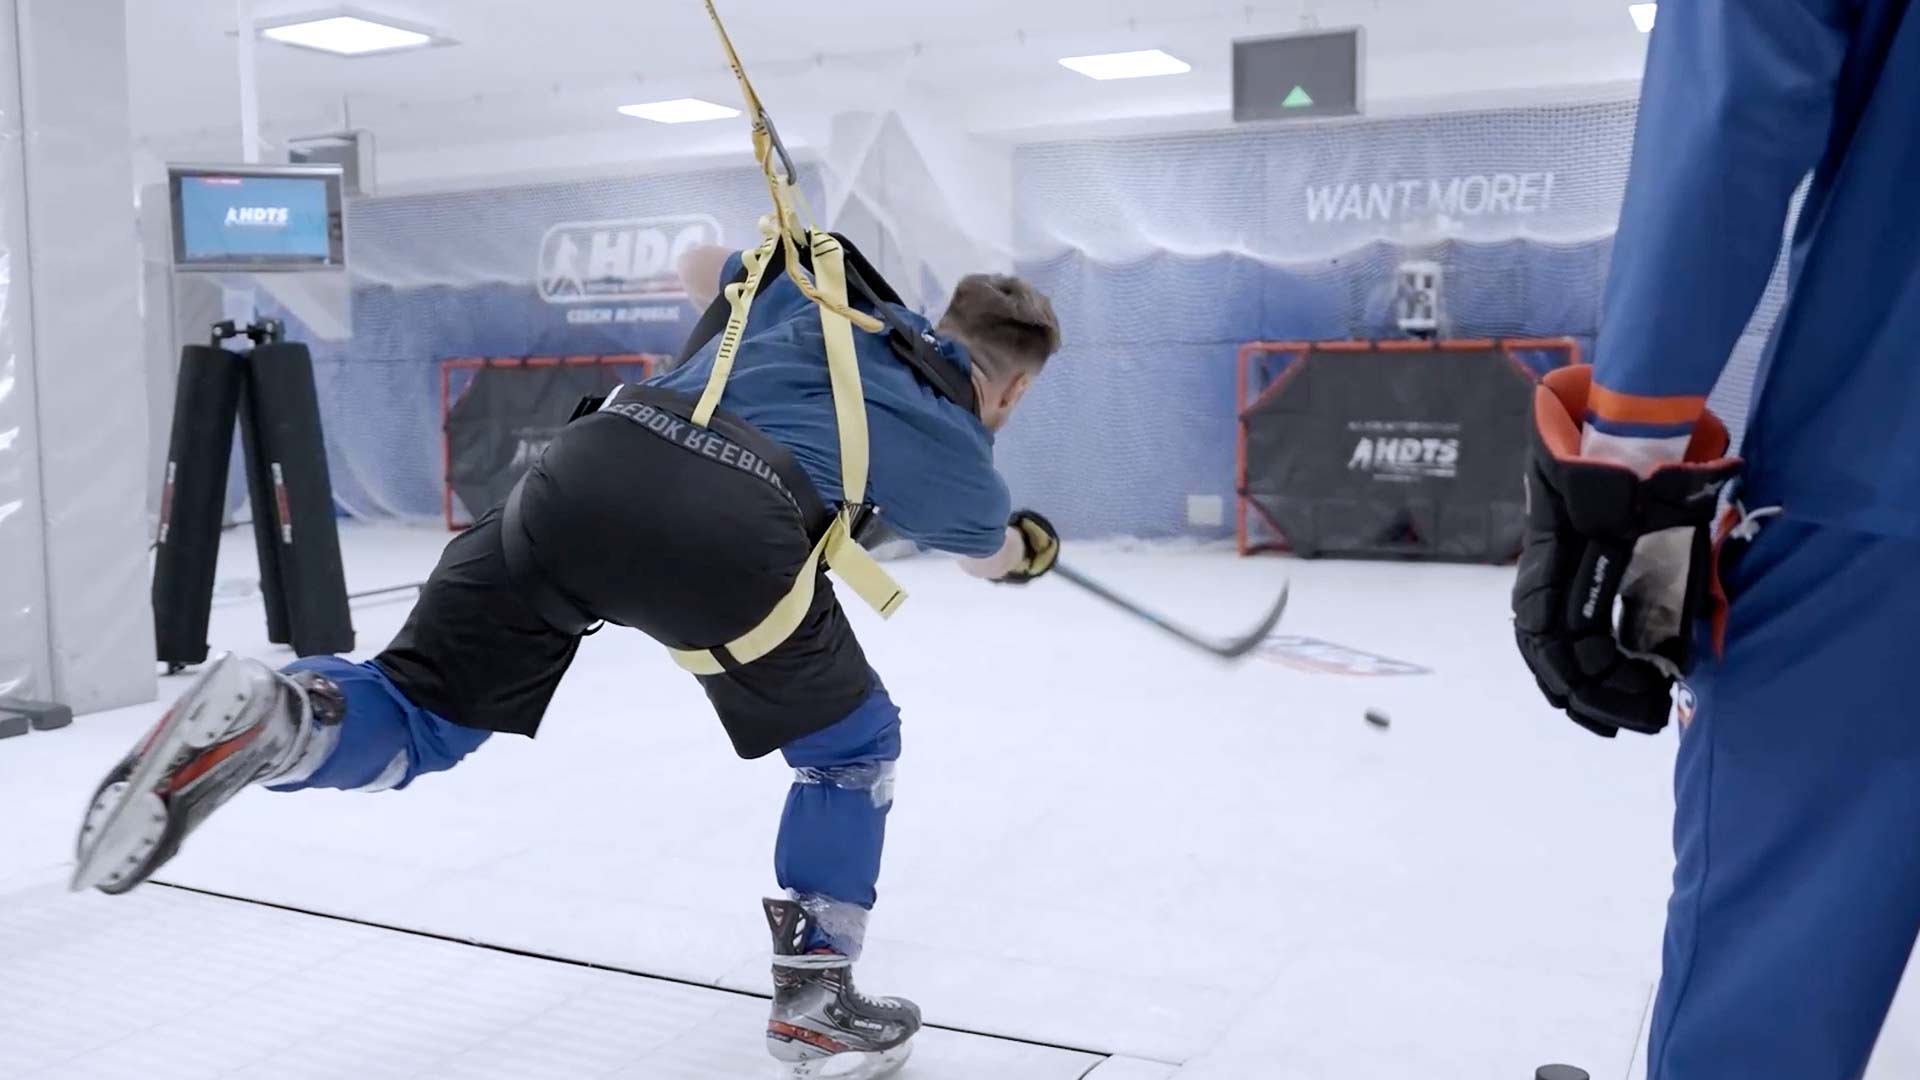 Shooter smart goal system to train shots on goal in hockey center